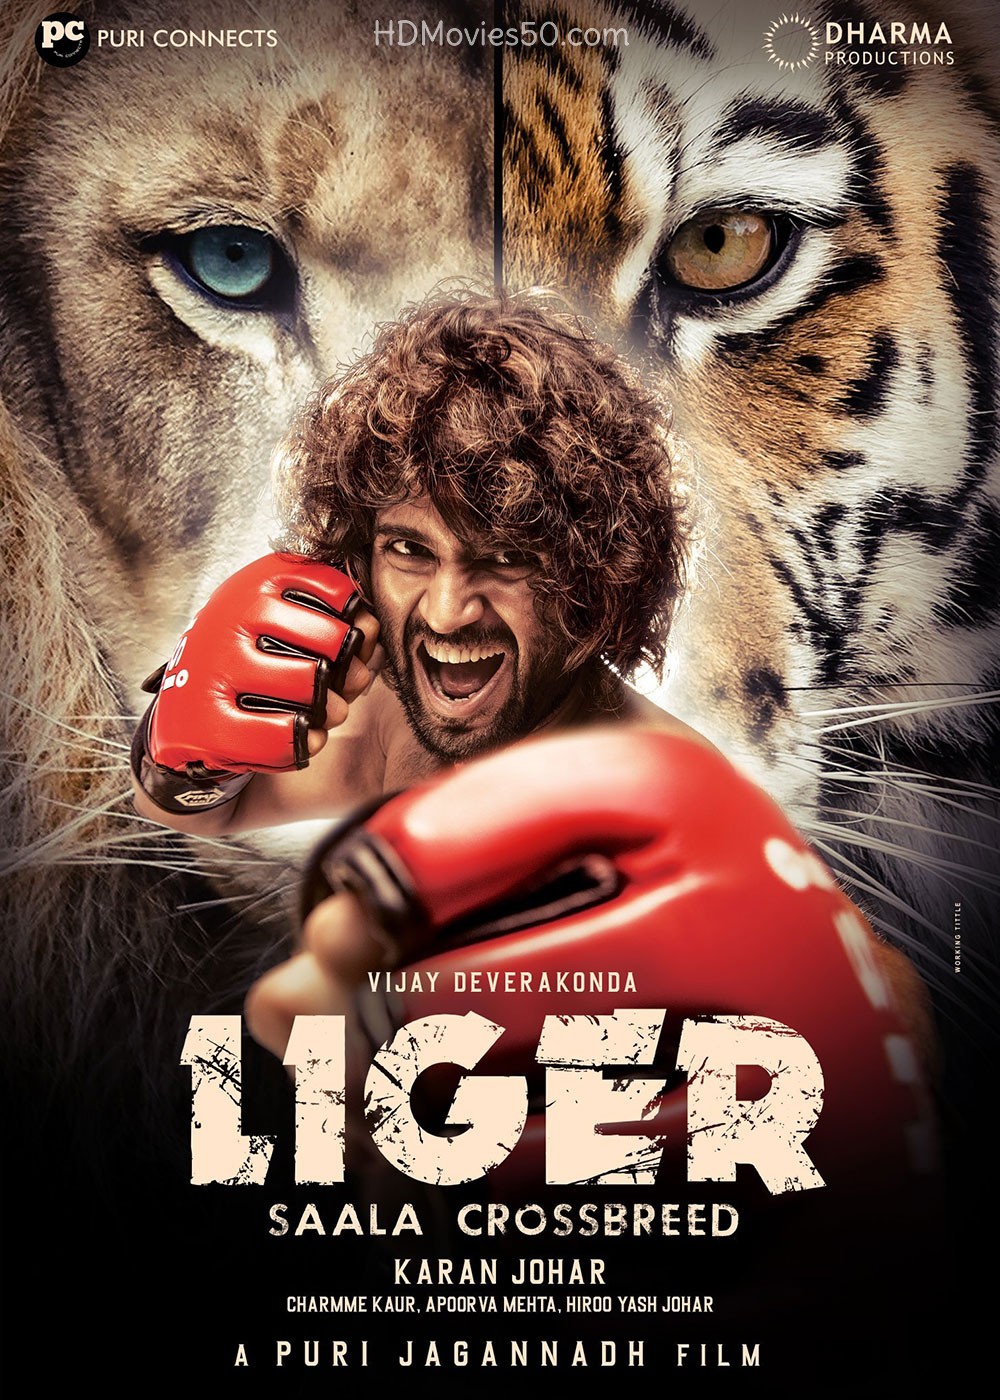 Liger 2022 Hindi Dubbed (Audio Cleaned) 1080p HDRip ESub 1.94GB Download